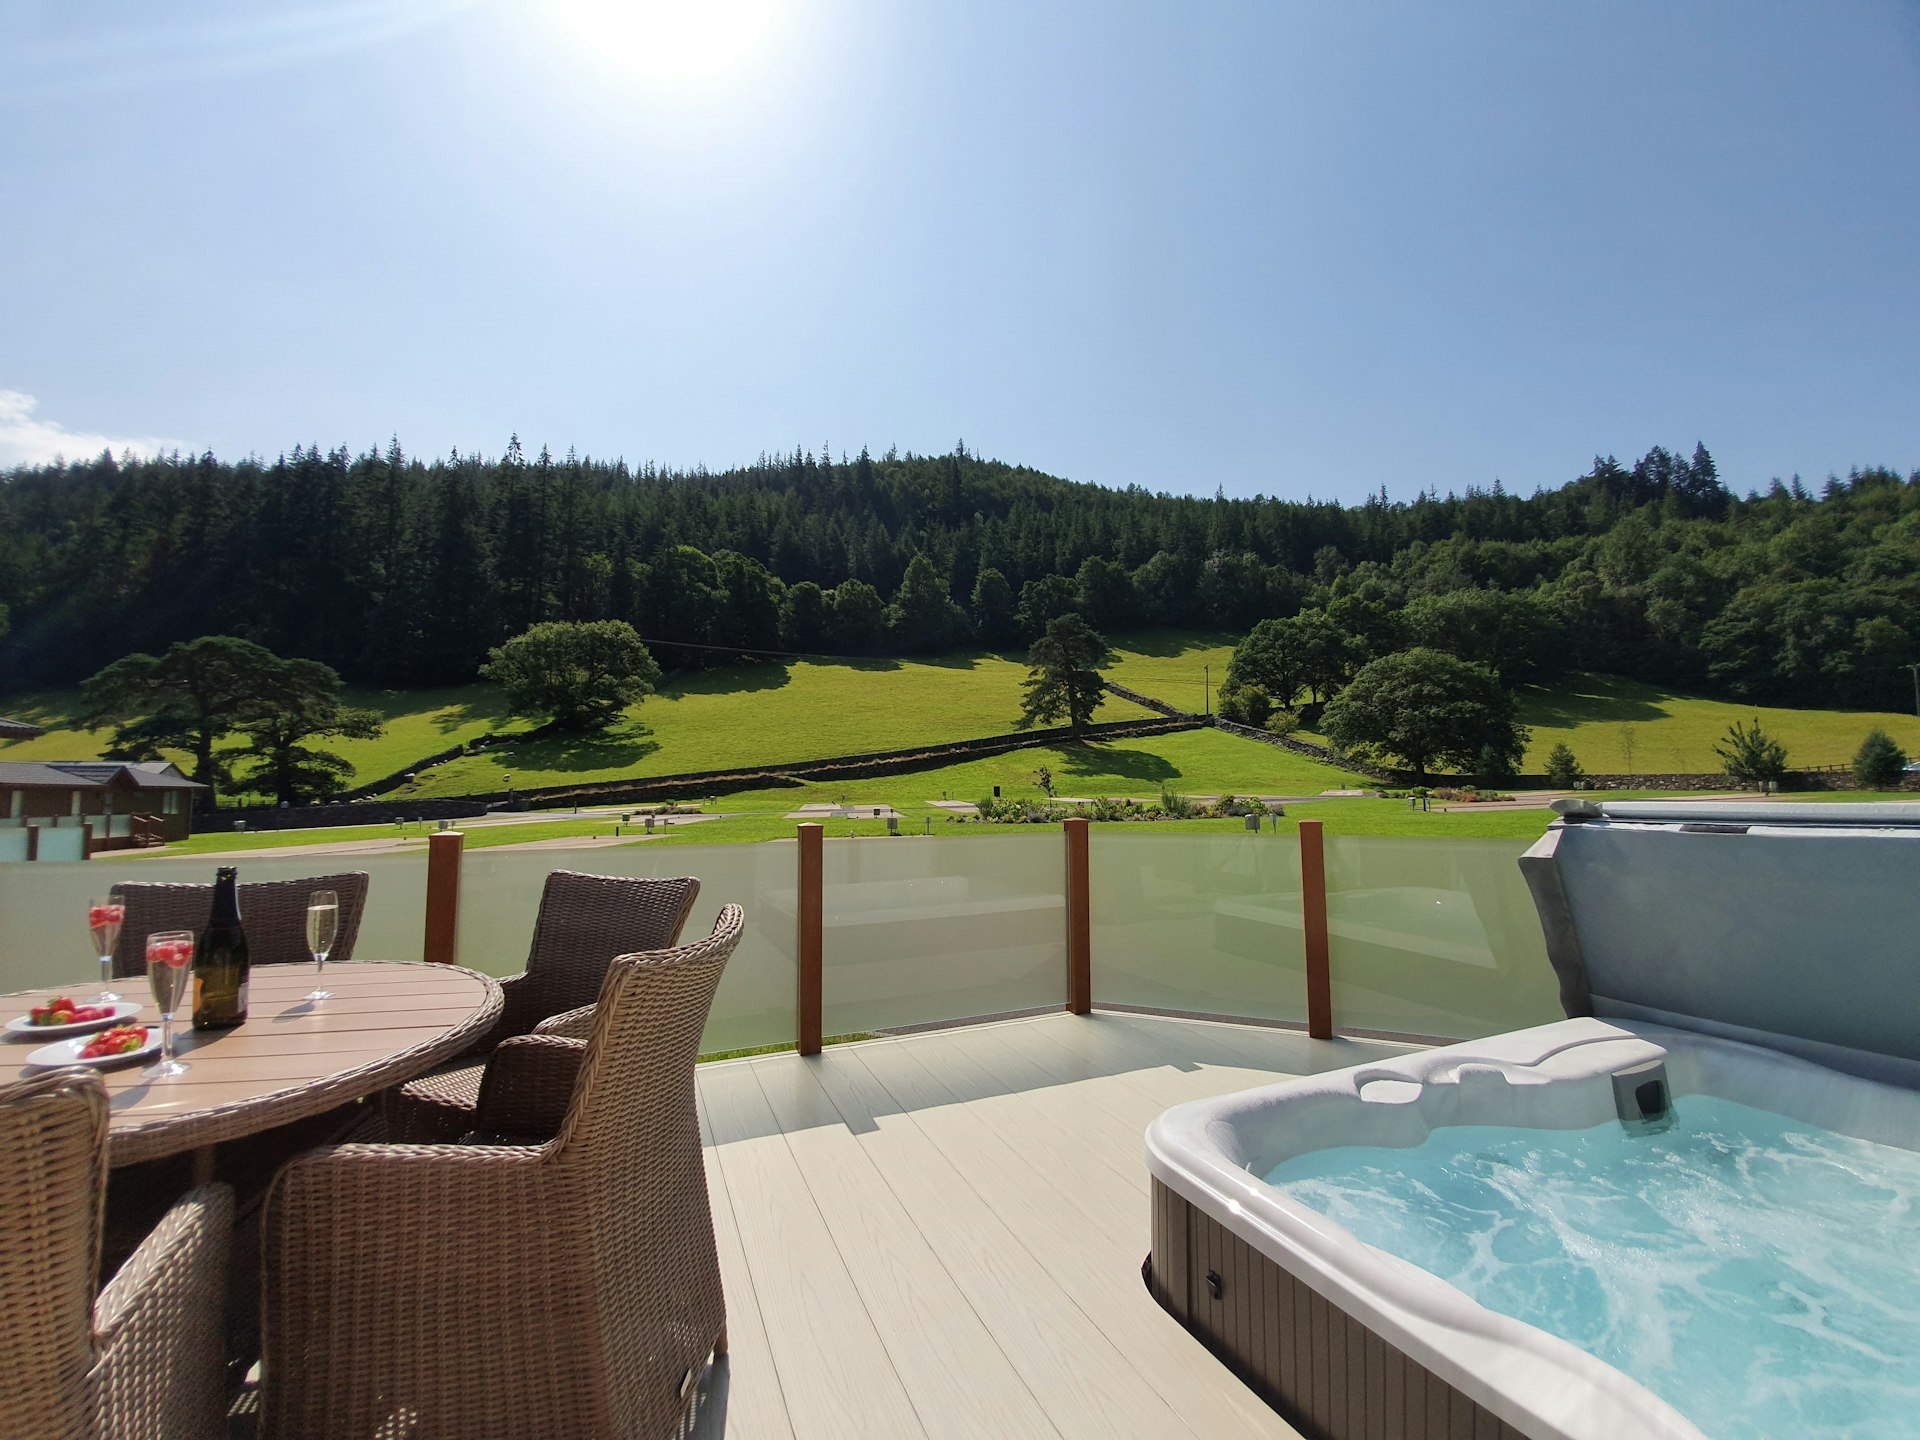 An outside deck with garden furniture and a hot tub, with rolling green fields in the background